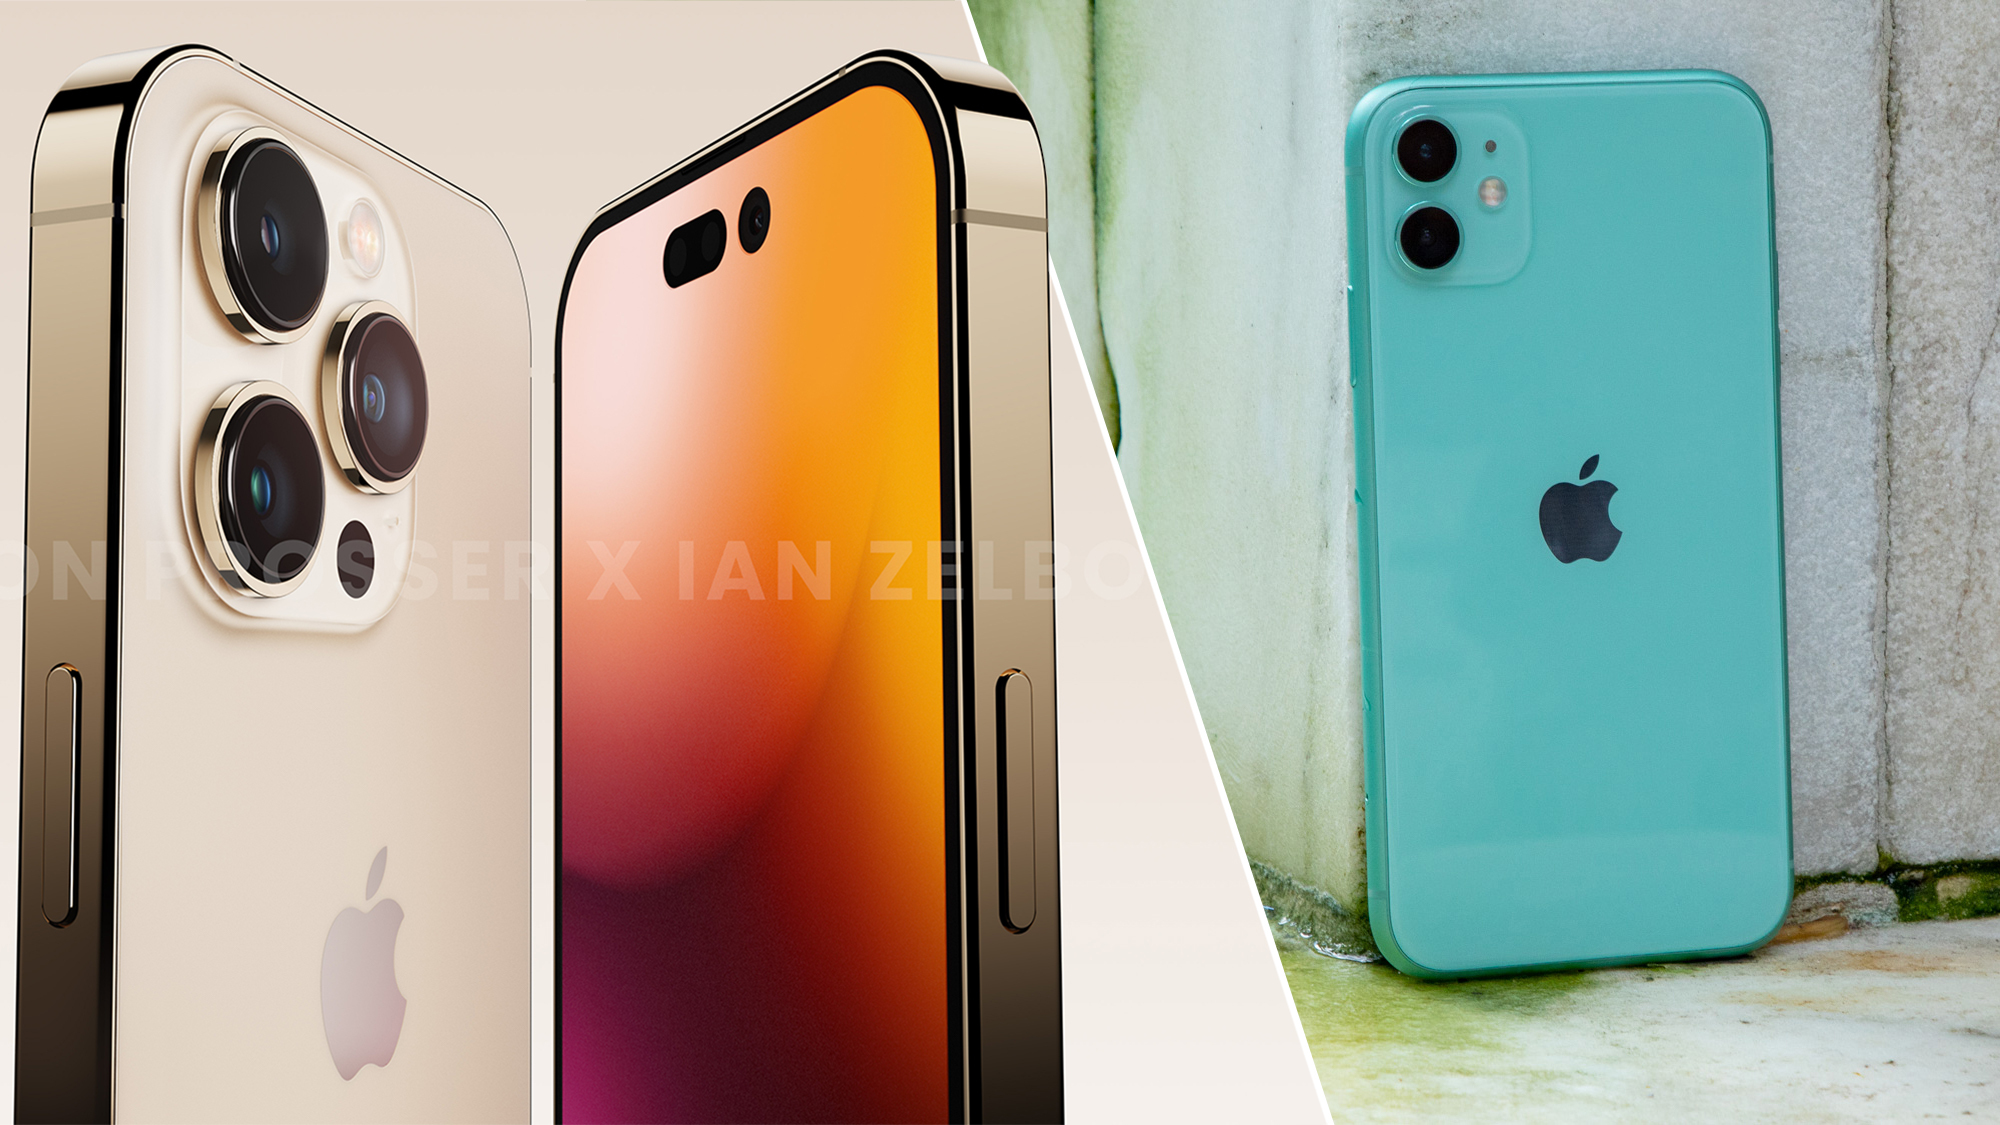 A split image of the rumored iPhone 14 Pro design and a real image of the iPhone 11